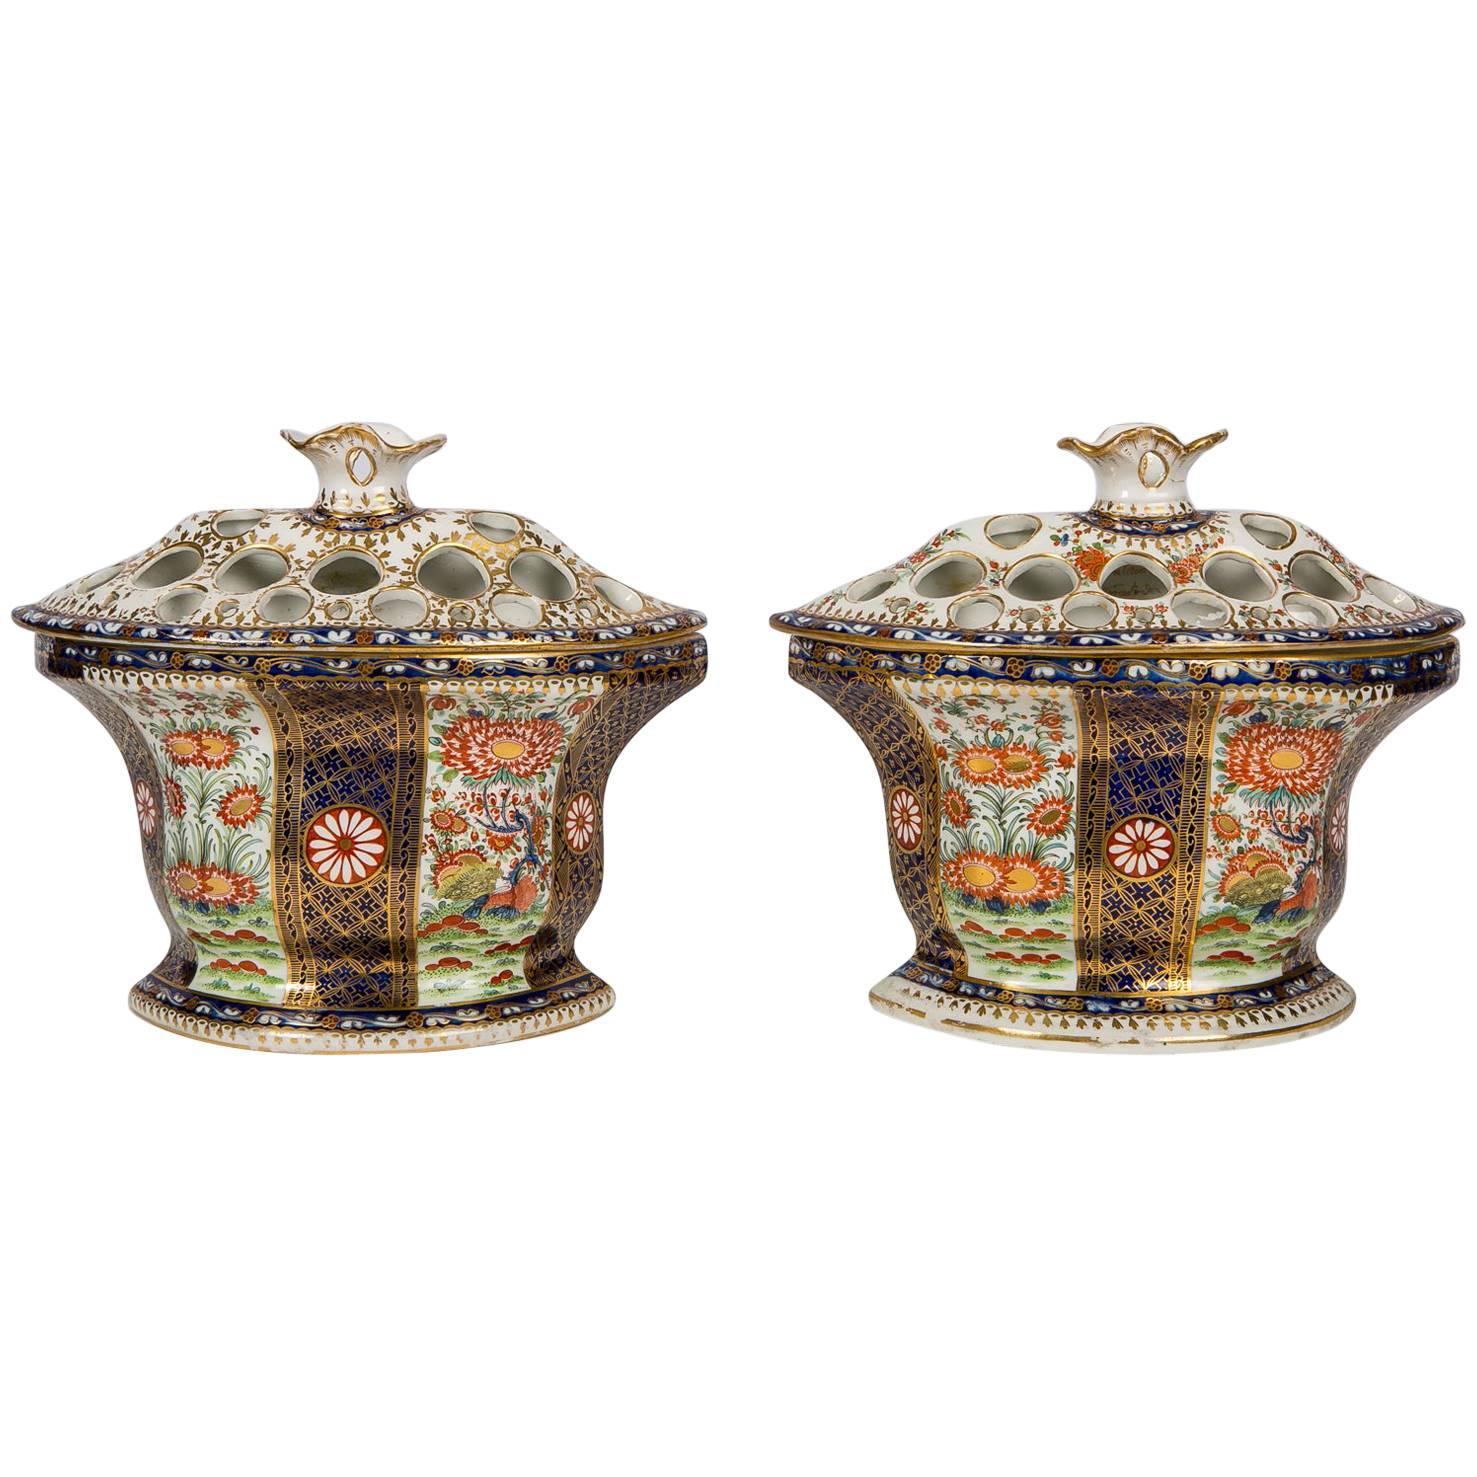 Pair Worcester Porcelain Bough Pots in "Rich Queen's" Pattern Made 1786- 1810 